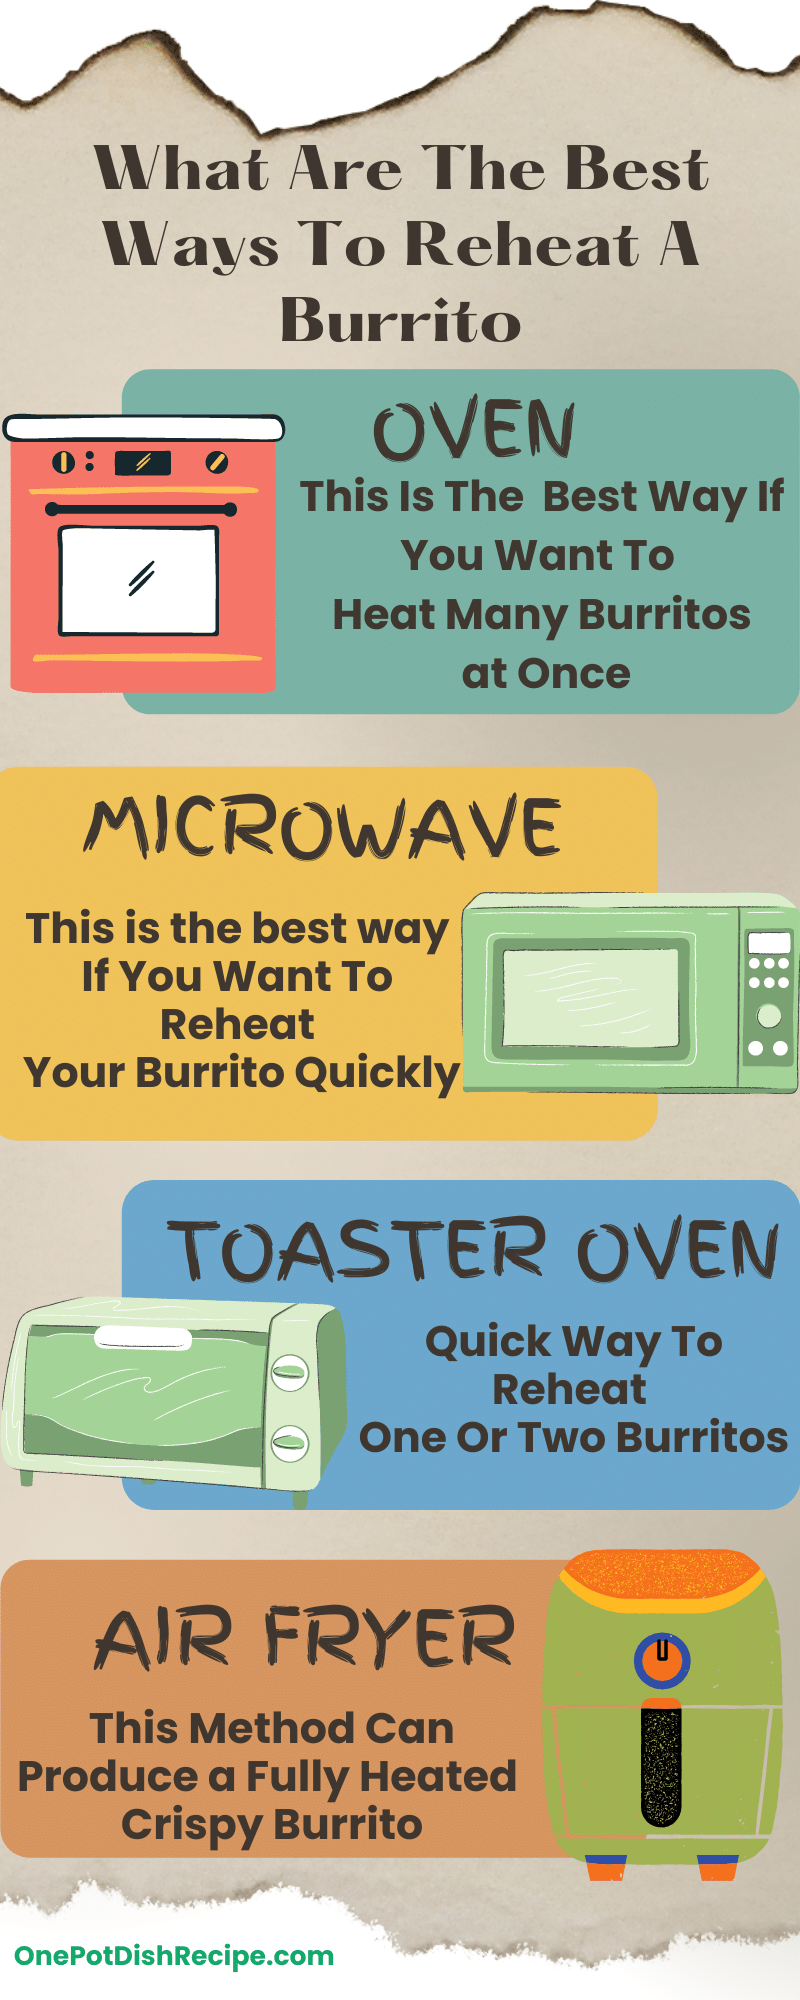 How To Refresh A Burrito Infographic